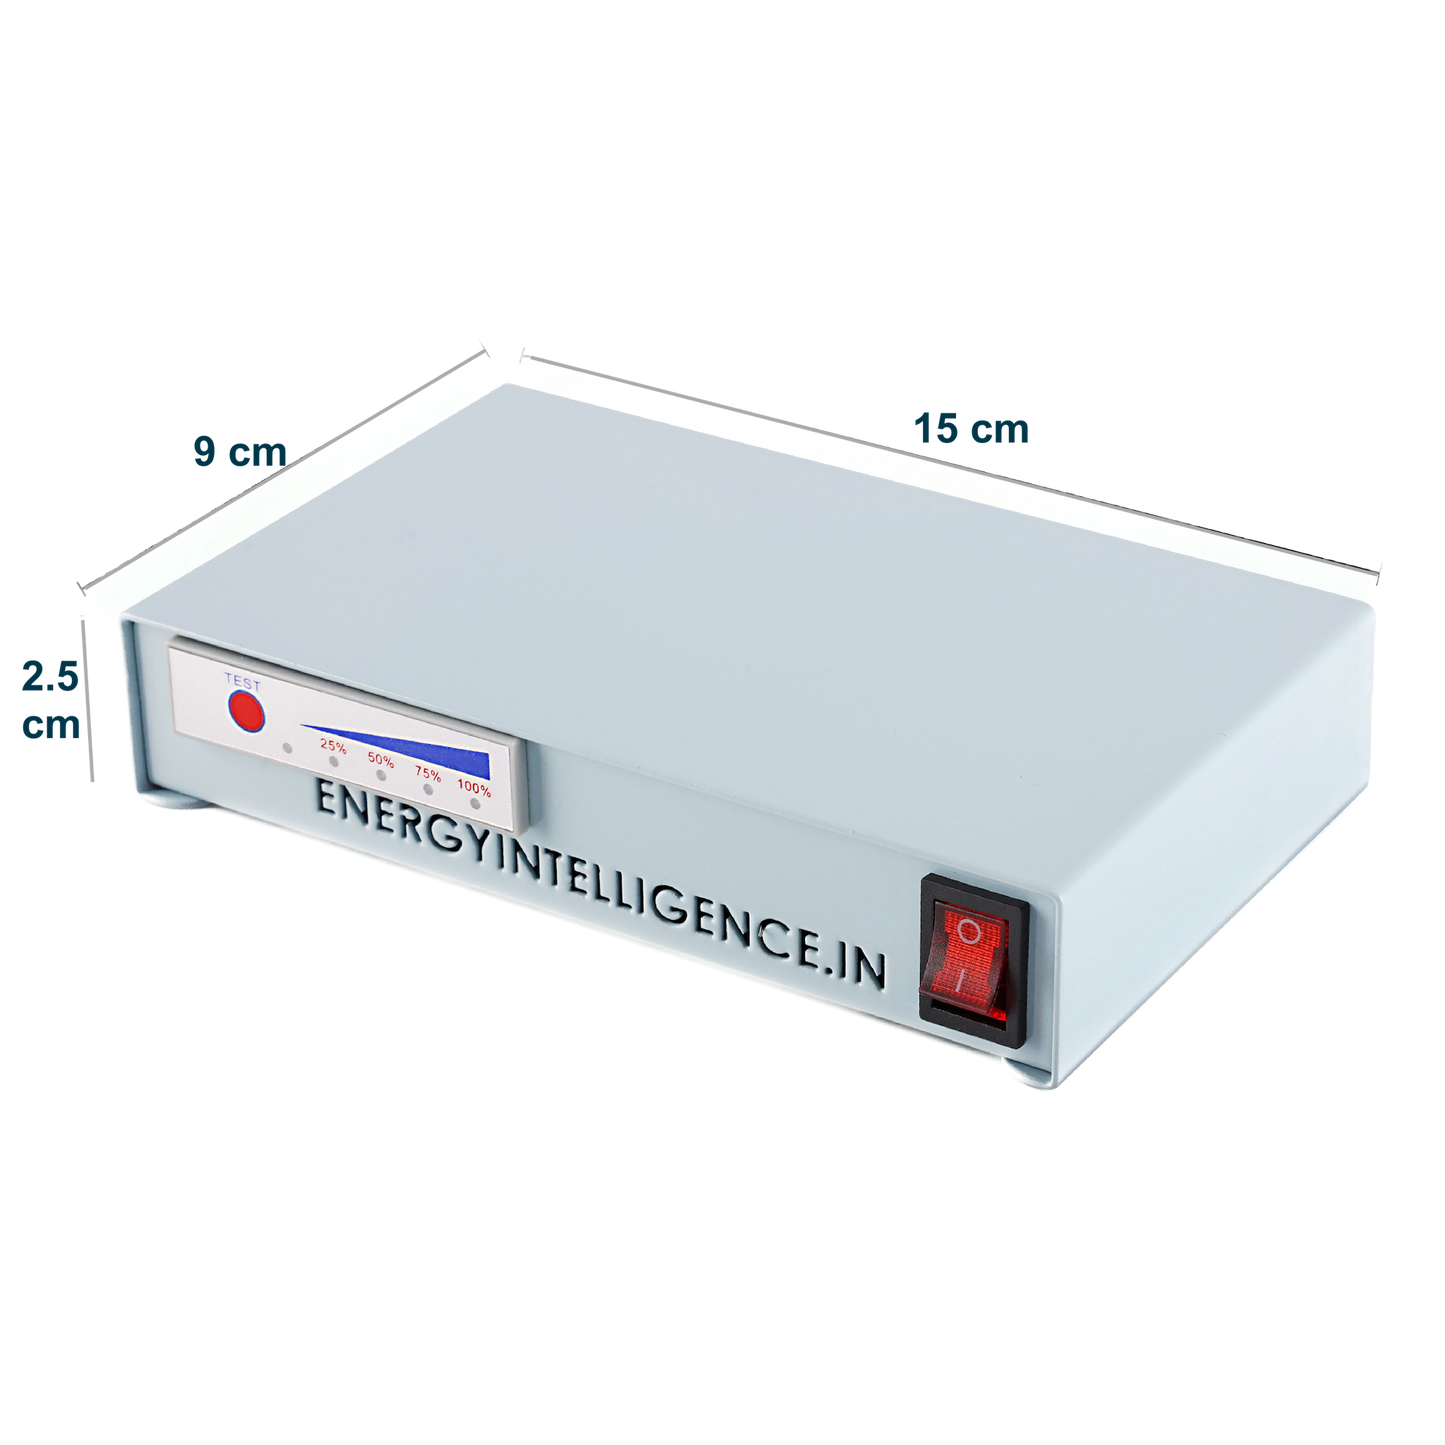 An isometric view of second generation Energy Intelligence Router UPS Front View